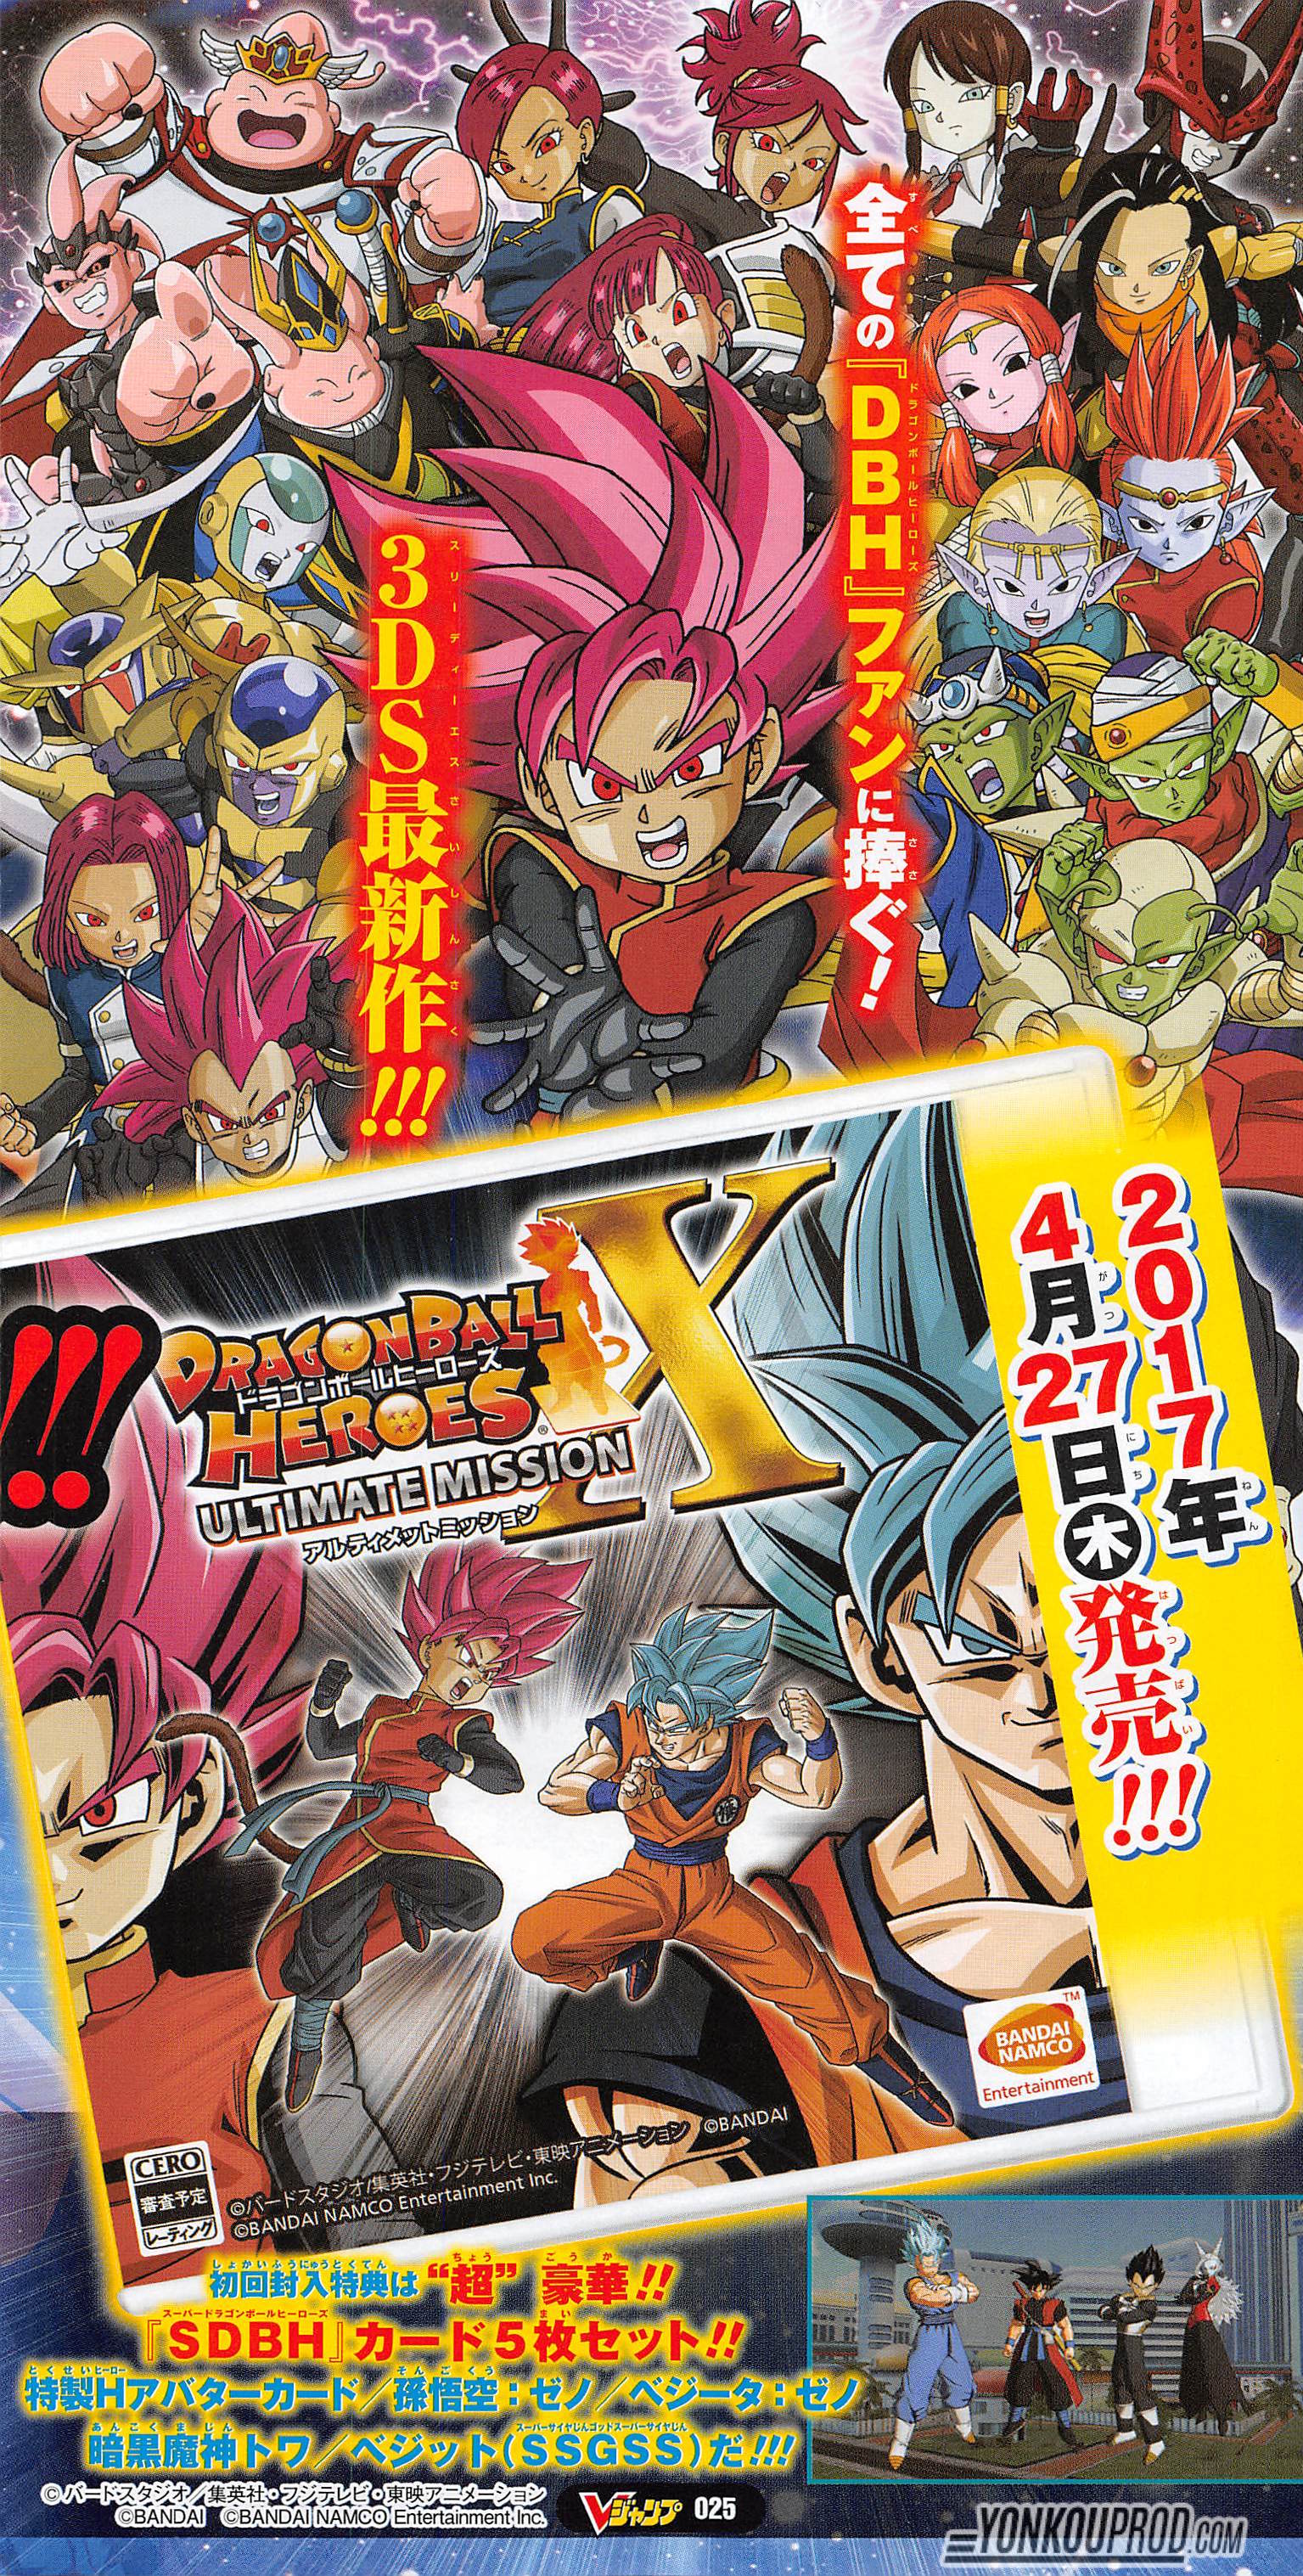 Dragon ball heroes ultimate mission x 3ds